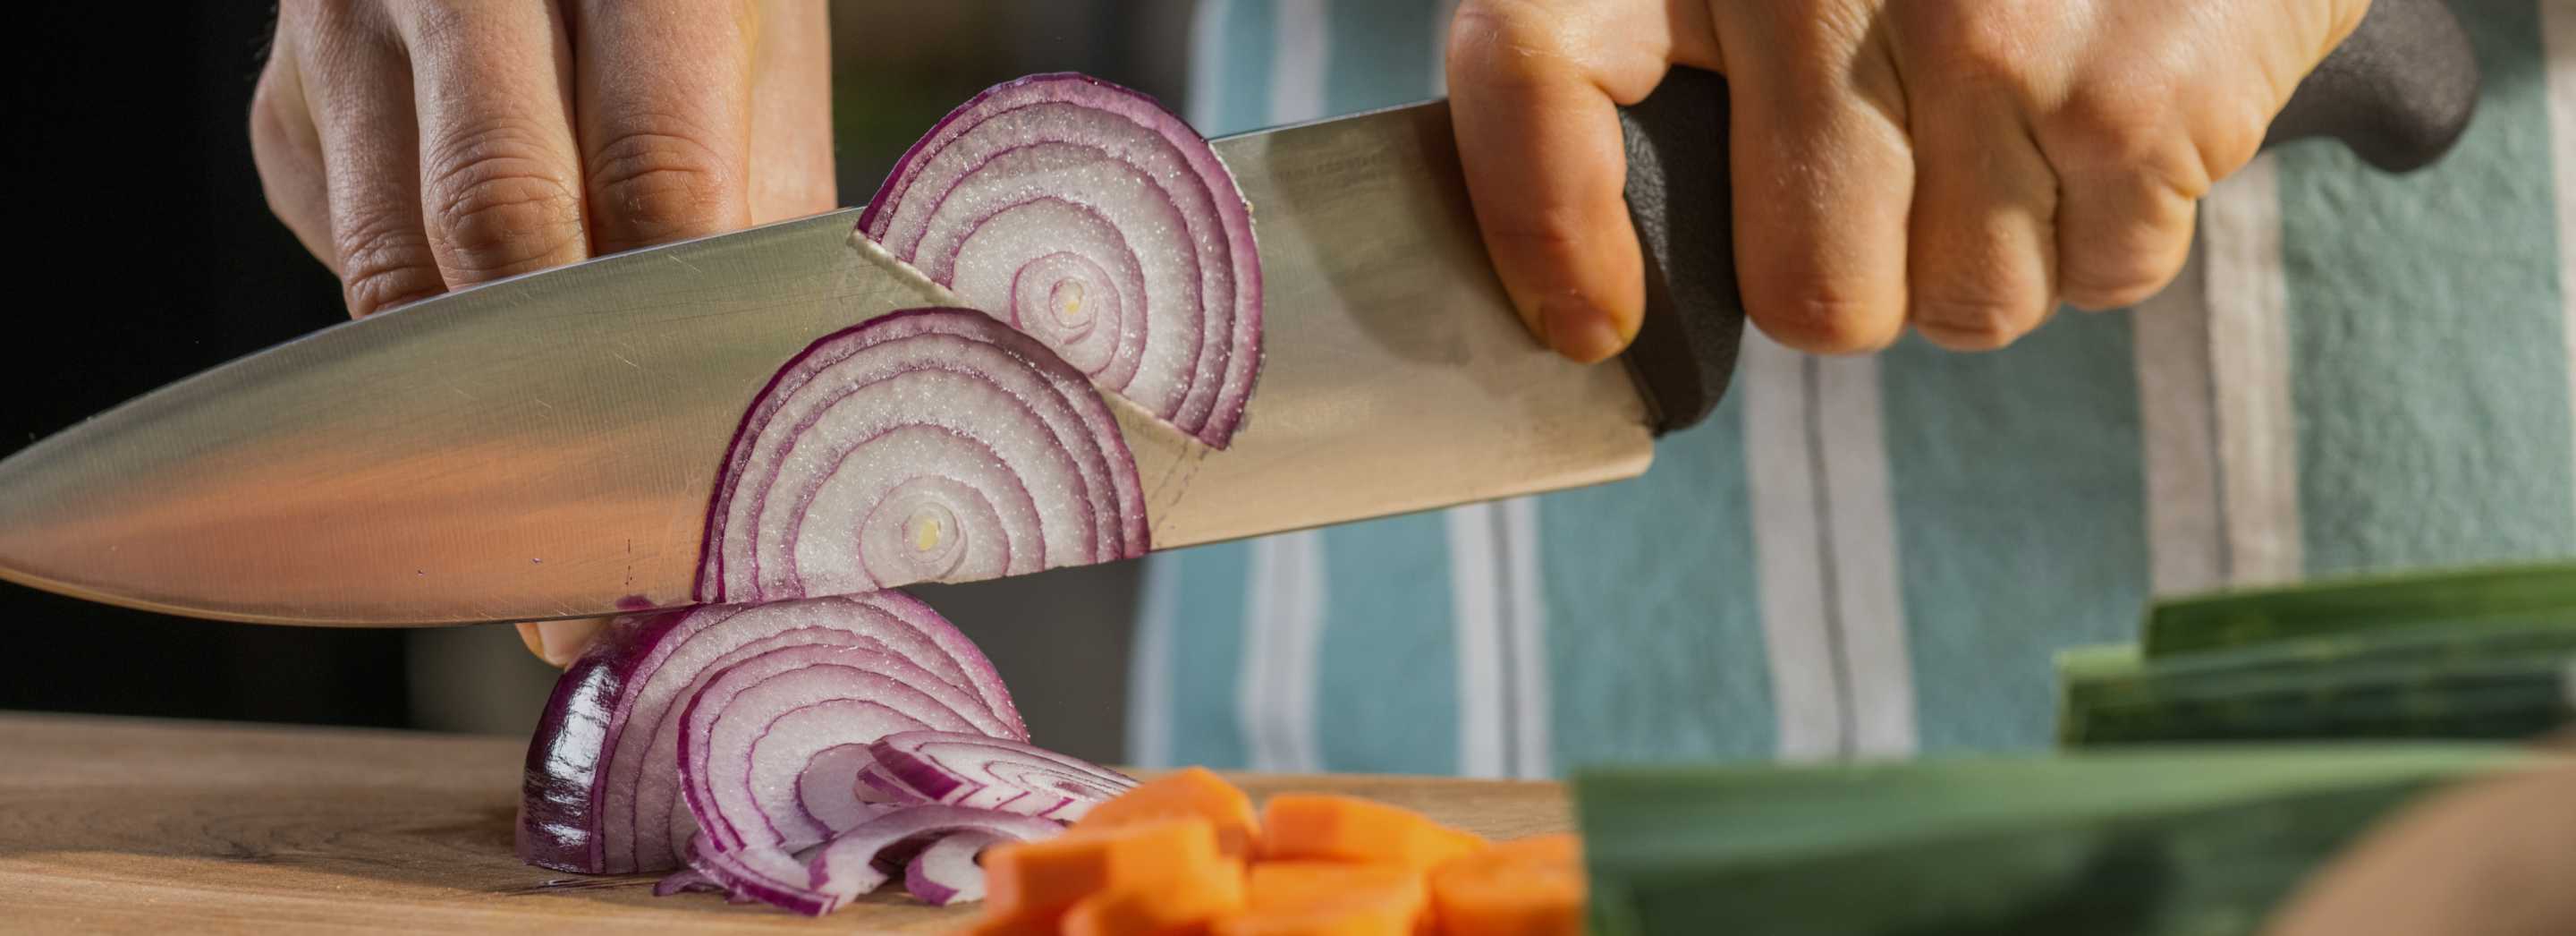 A person's hand is shown slicing an onion with a large bladed knife.